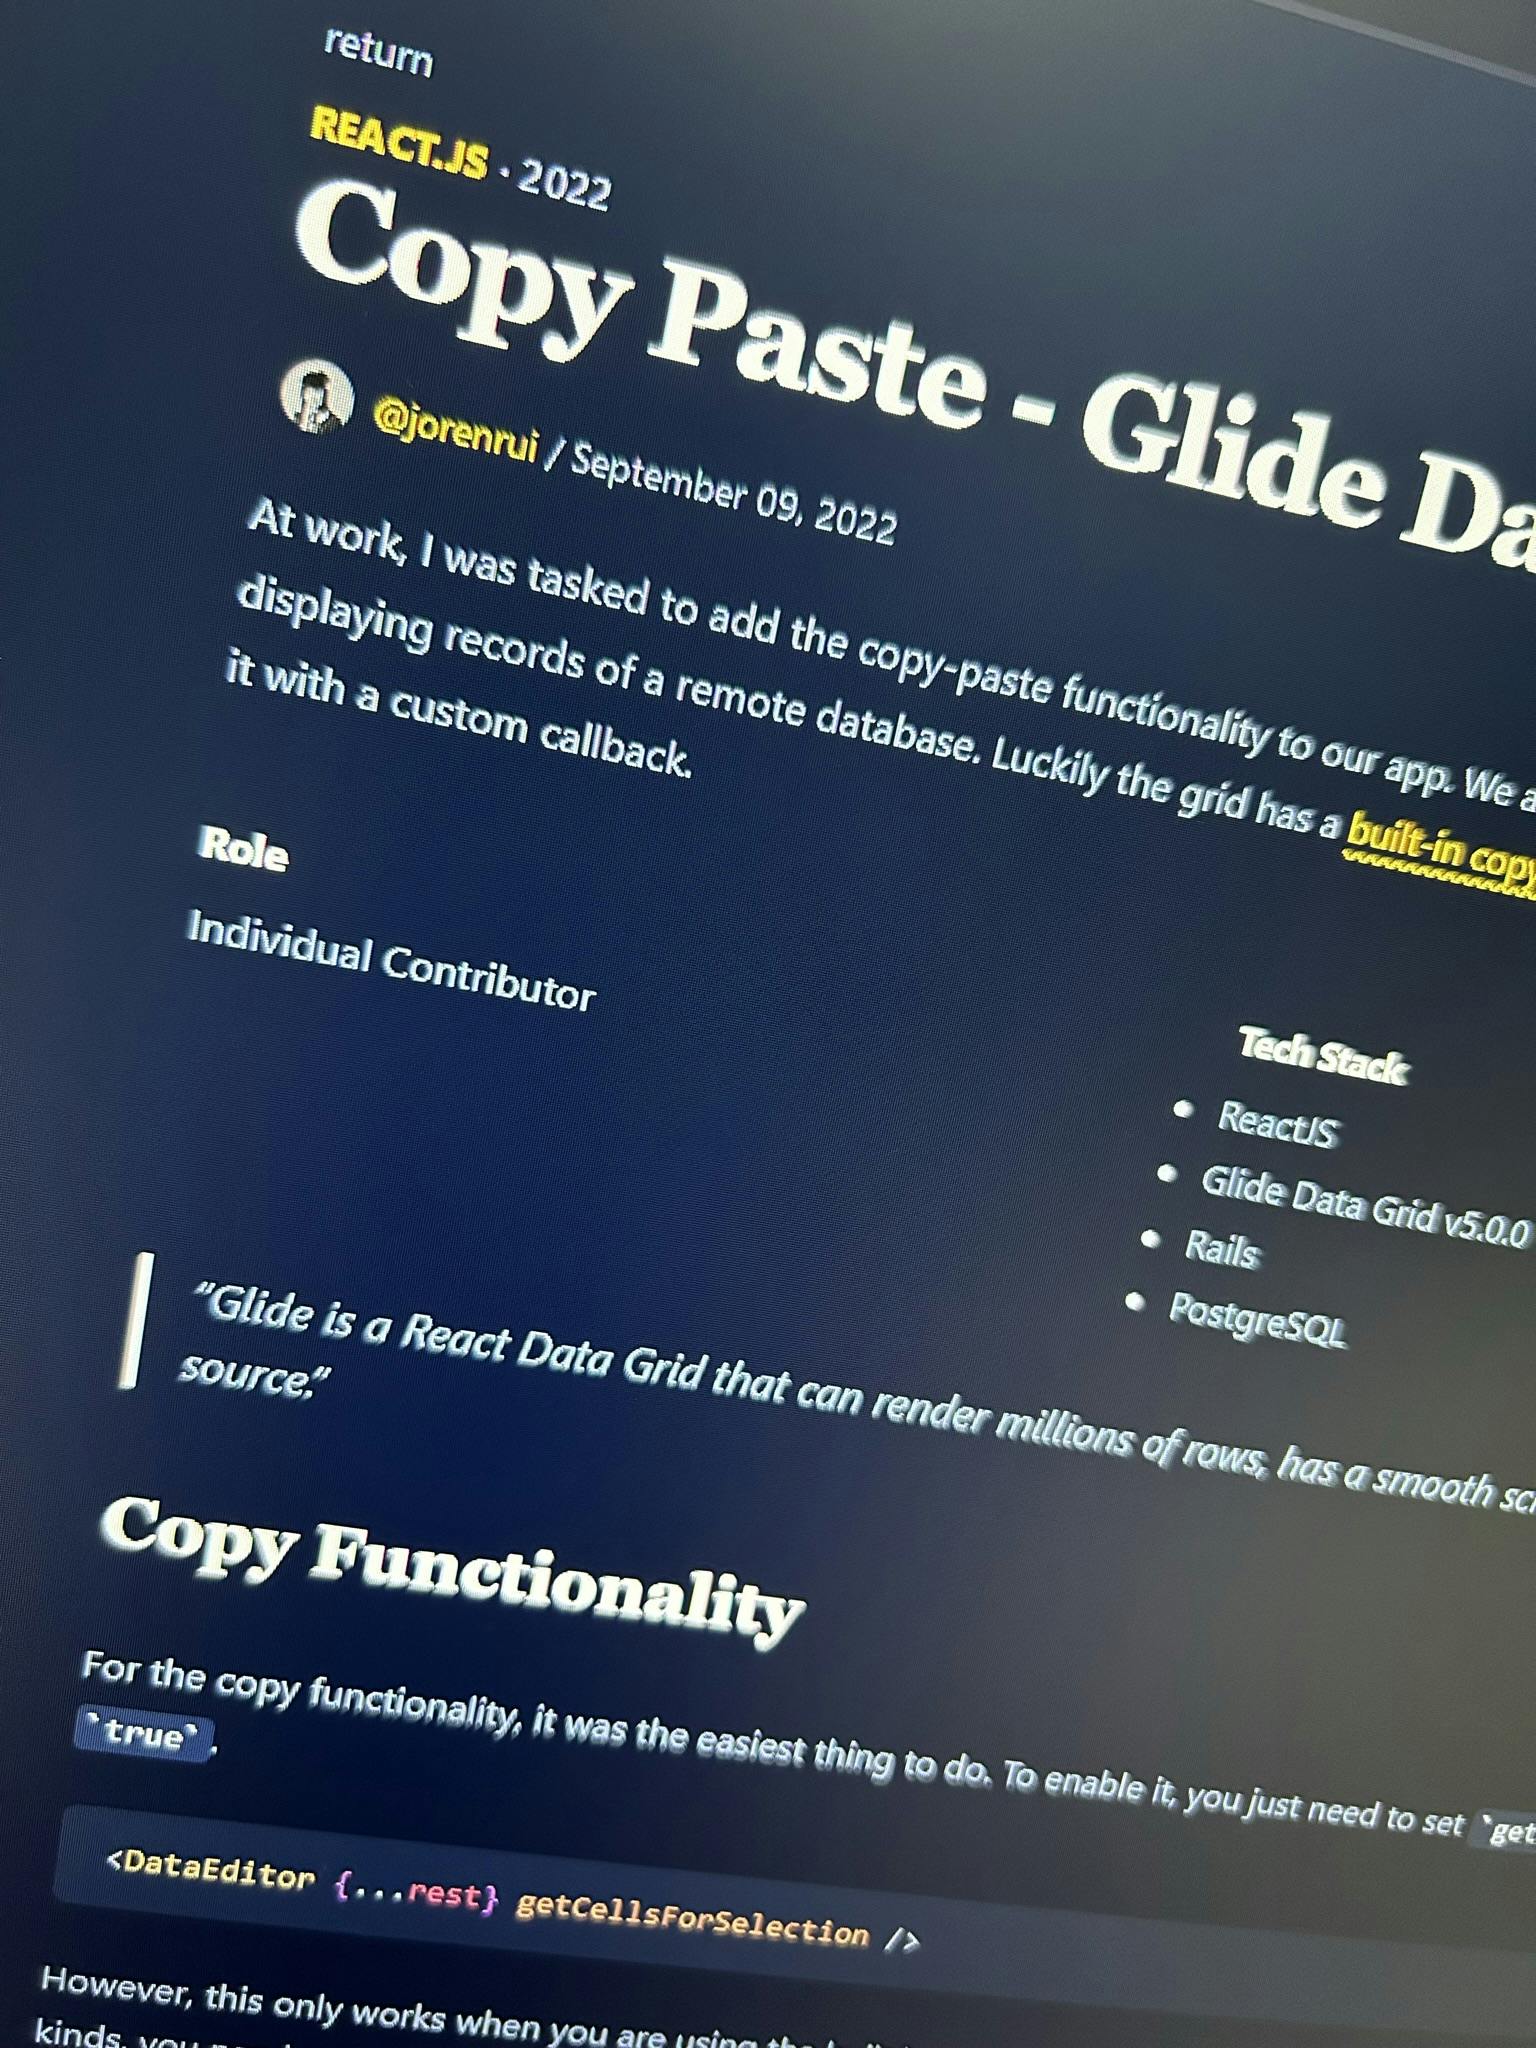 A picture of a blog post entitled "Copy Paste - Glide Data Grid" by @jorenrui / September 09, 2022.